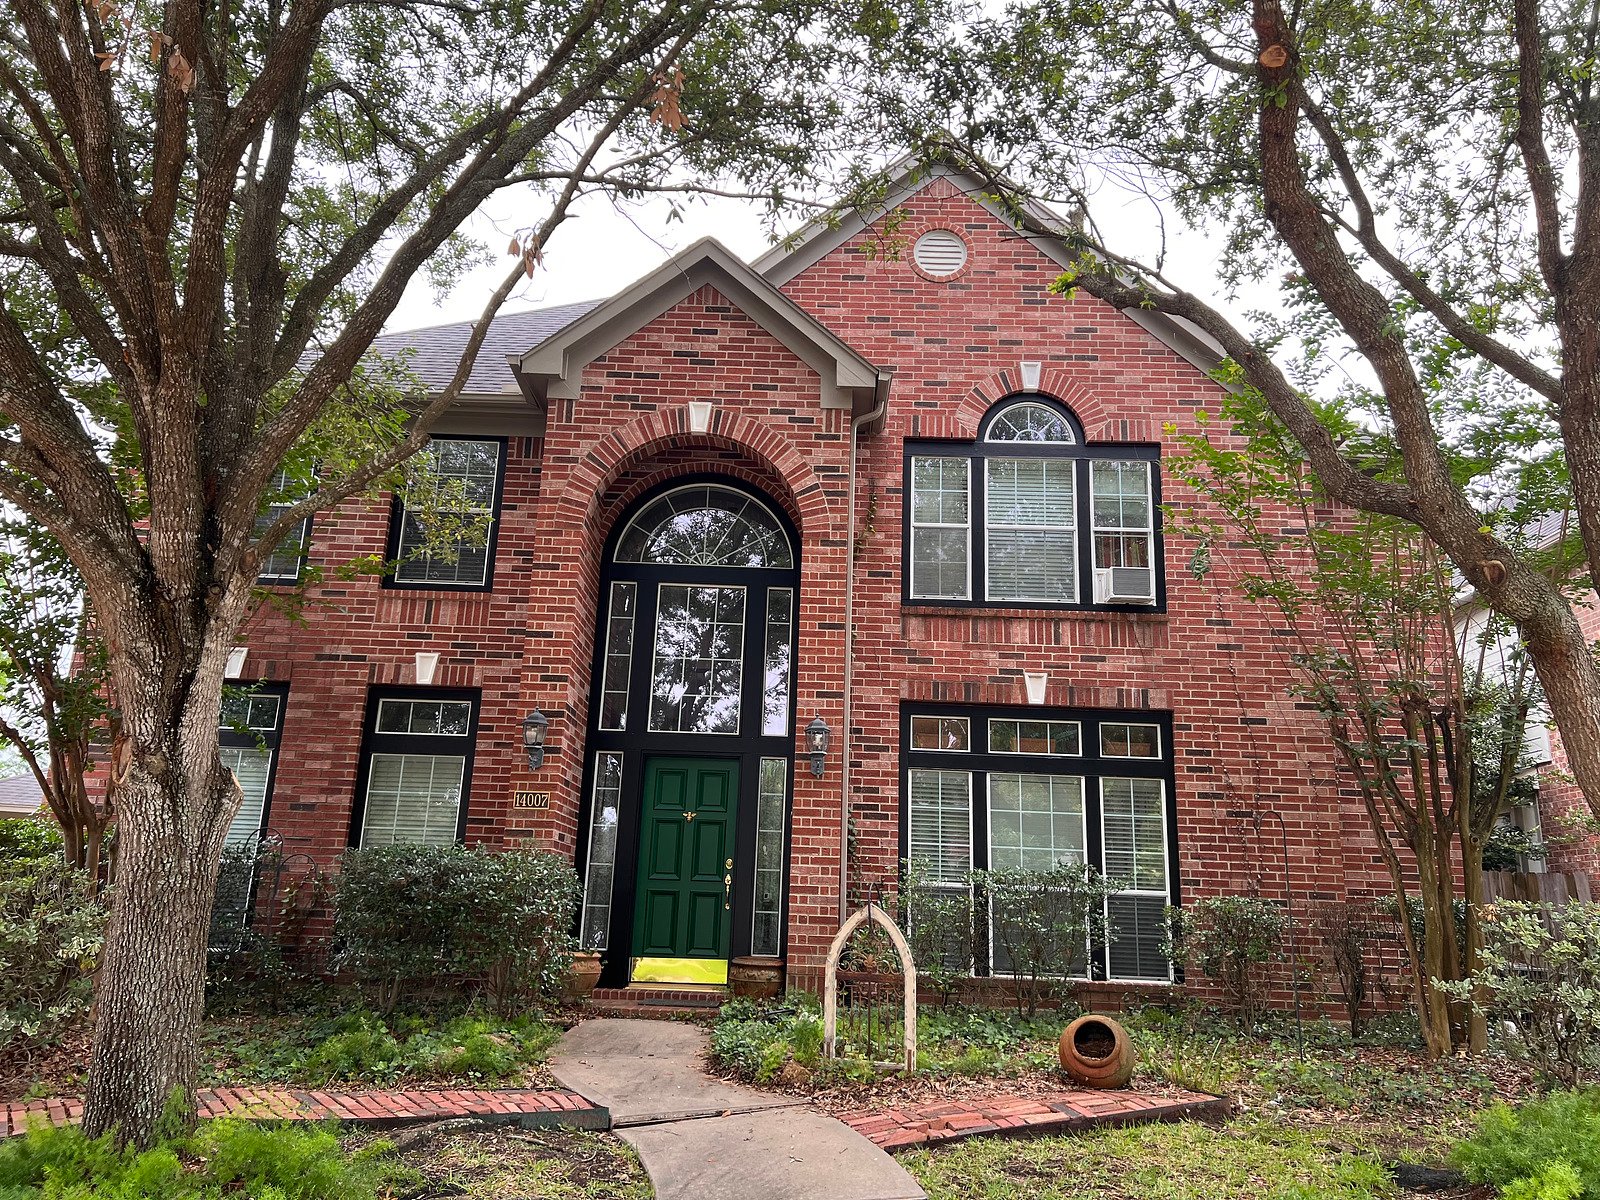 A red brick home with freshly painted accents and trim in Texas